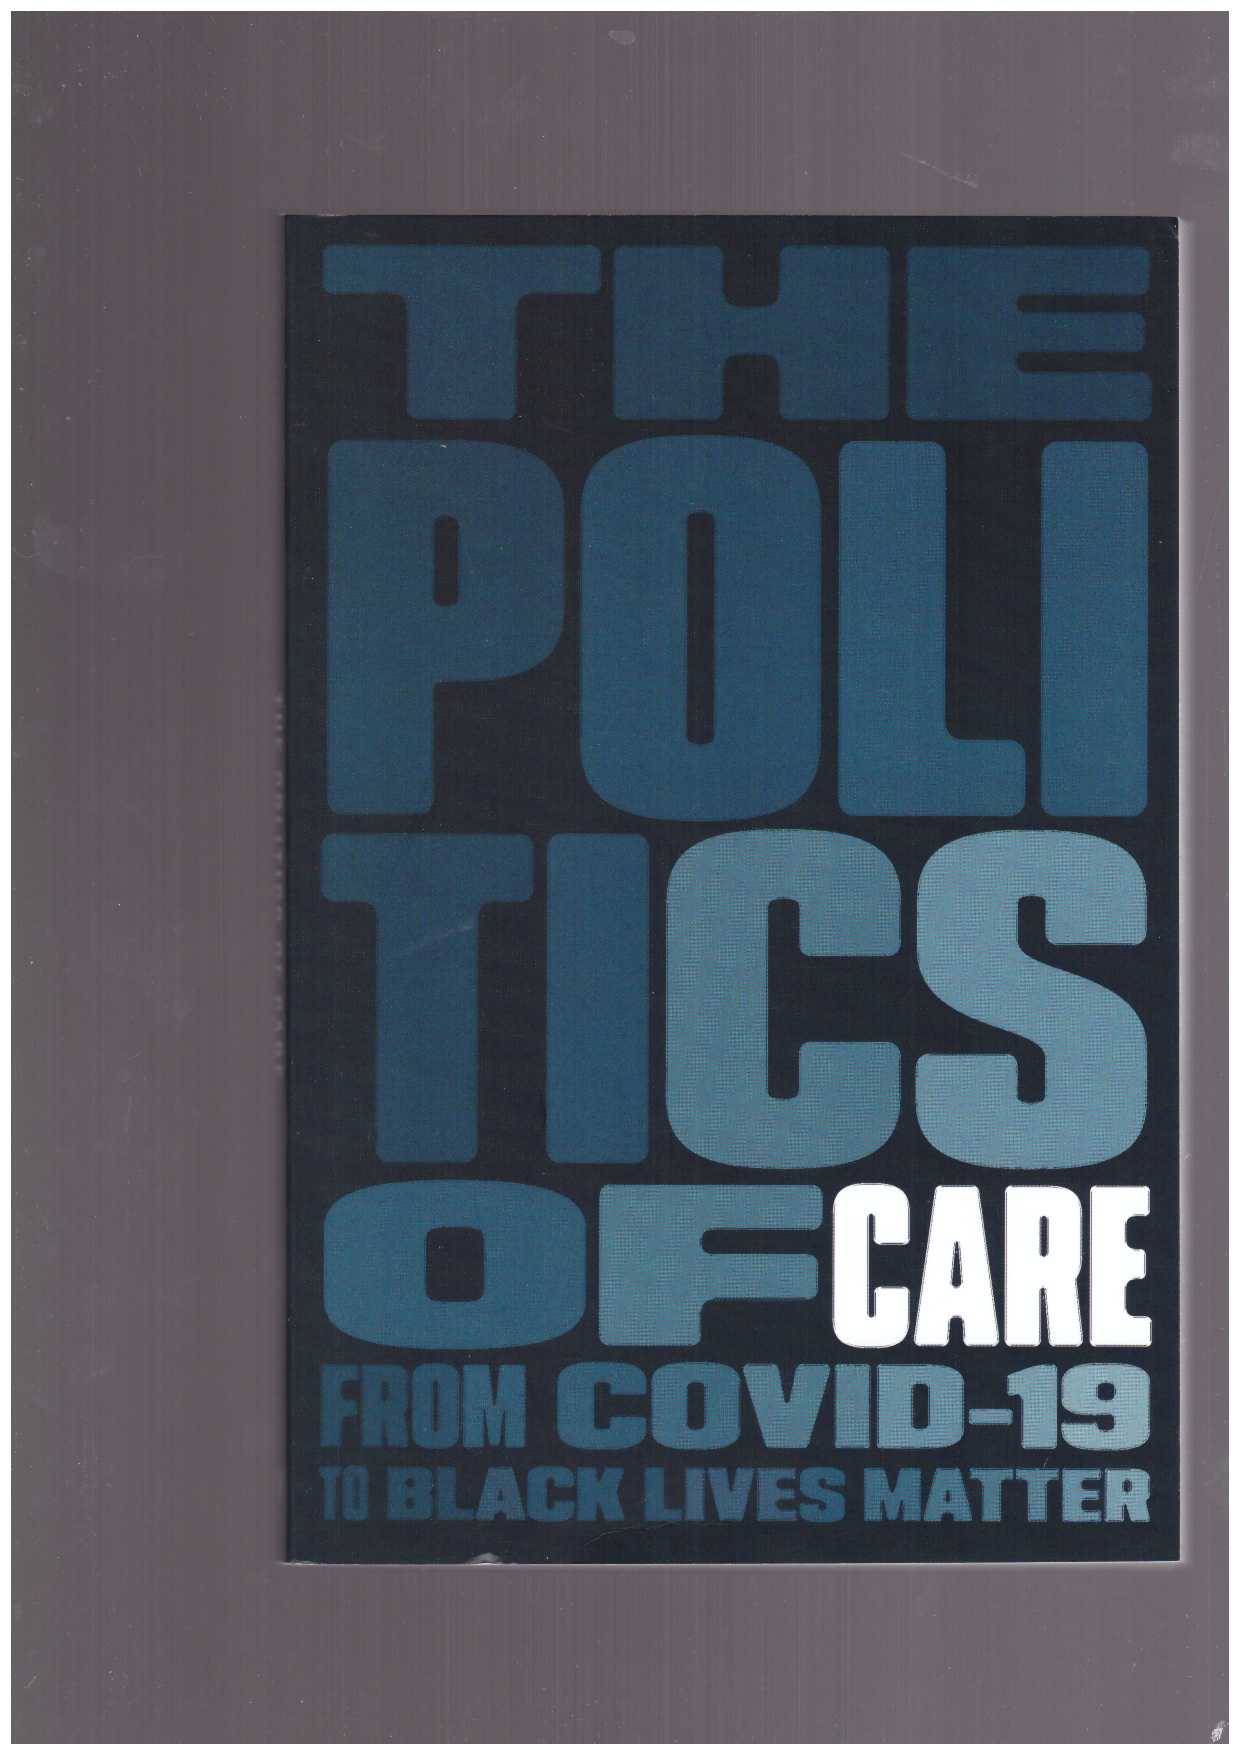 Boston Review (eds) - The Politics of Care. From COVID-19 to Black Lives Matter